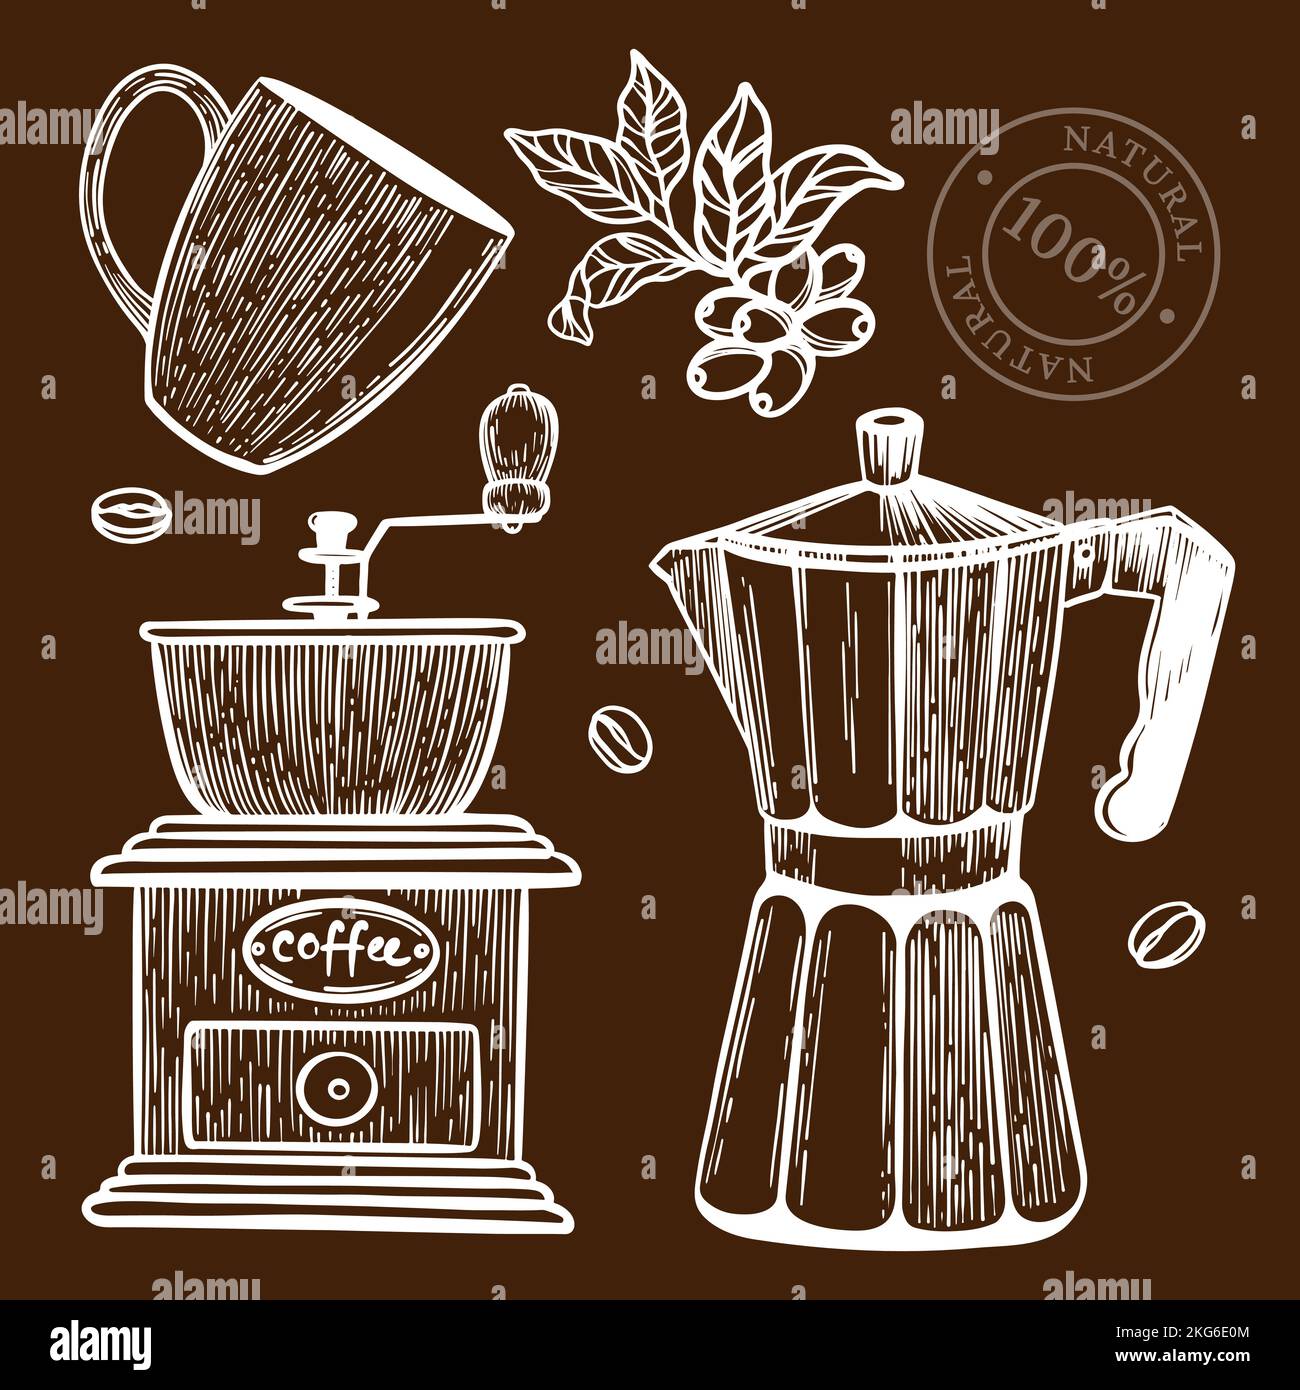 COFFEE MILL SKETCH Design Of Stickers And Labels For Shop Of Dessert Drinks And Naturals In Vintage Style Hand Drawn Clip Art Vector Illustration Set Stock Vector